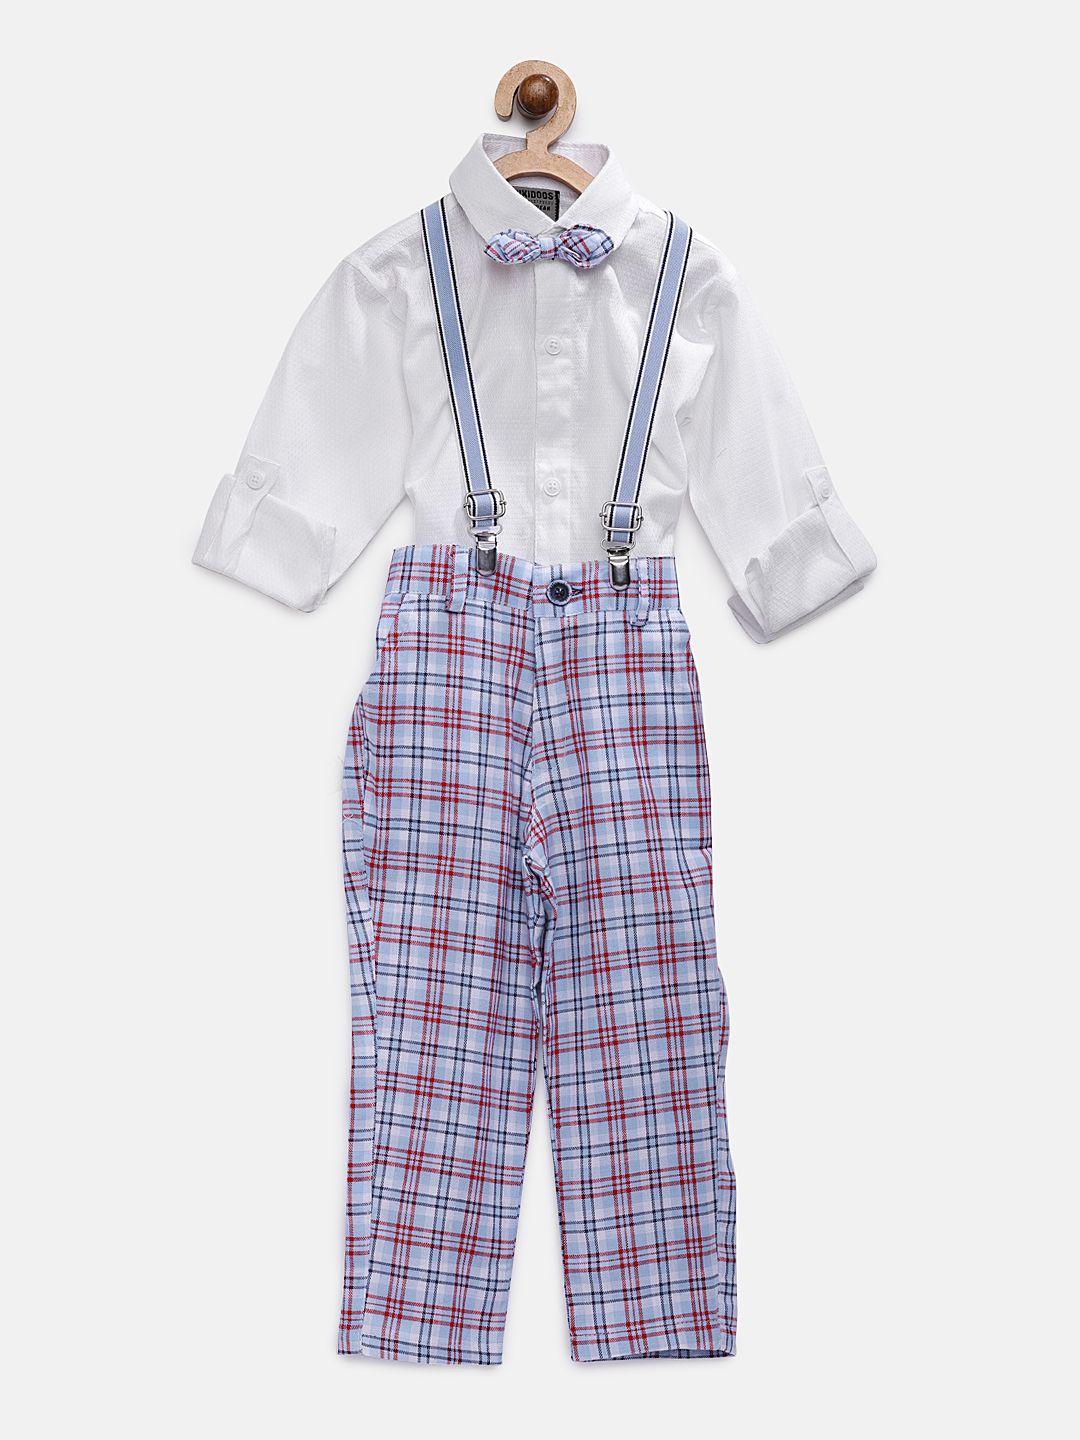 rikidoos-boys-white-&-blue-solid-shirt-with-trousers